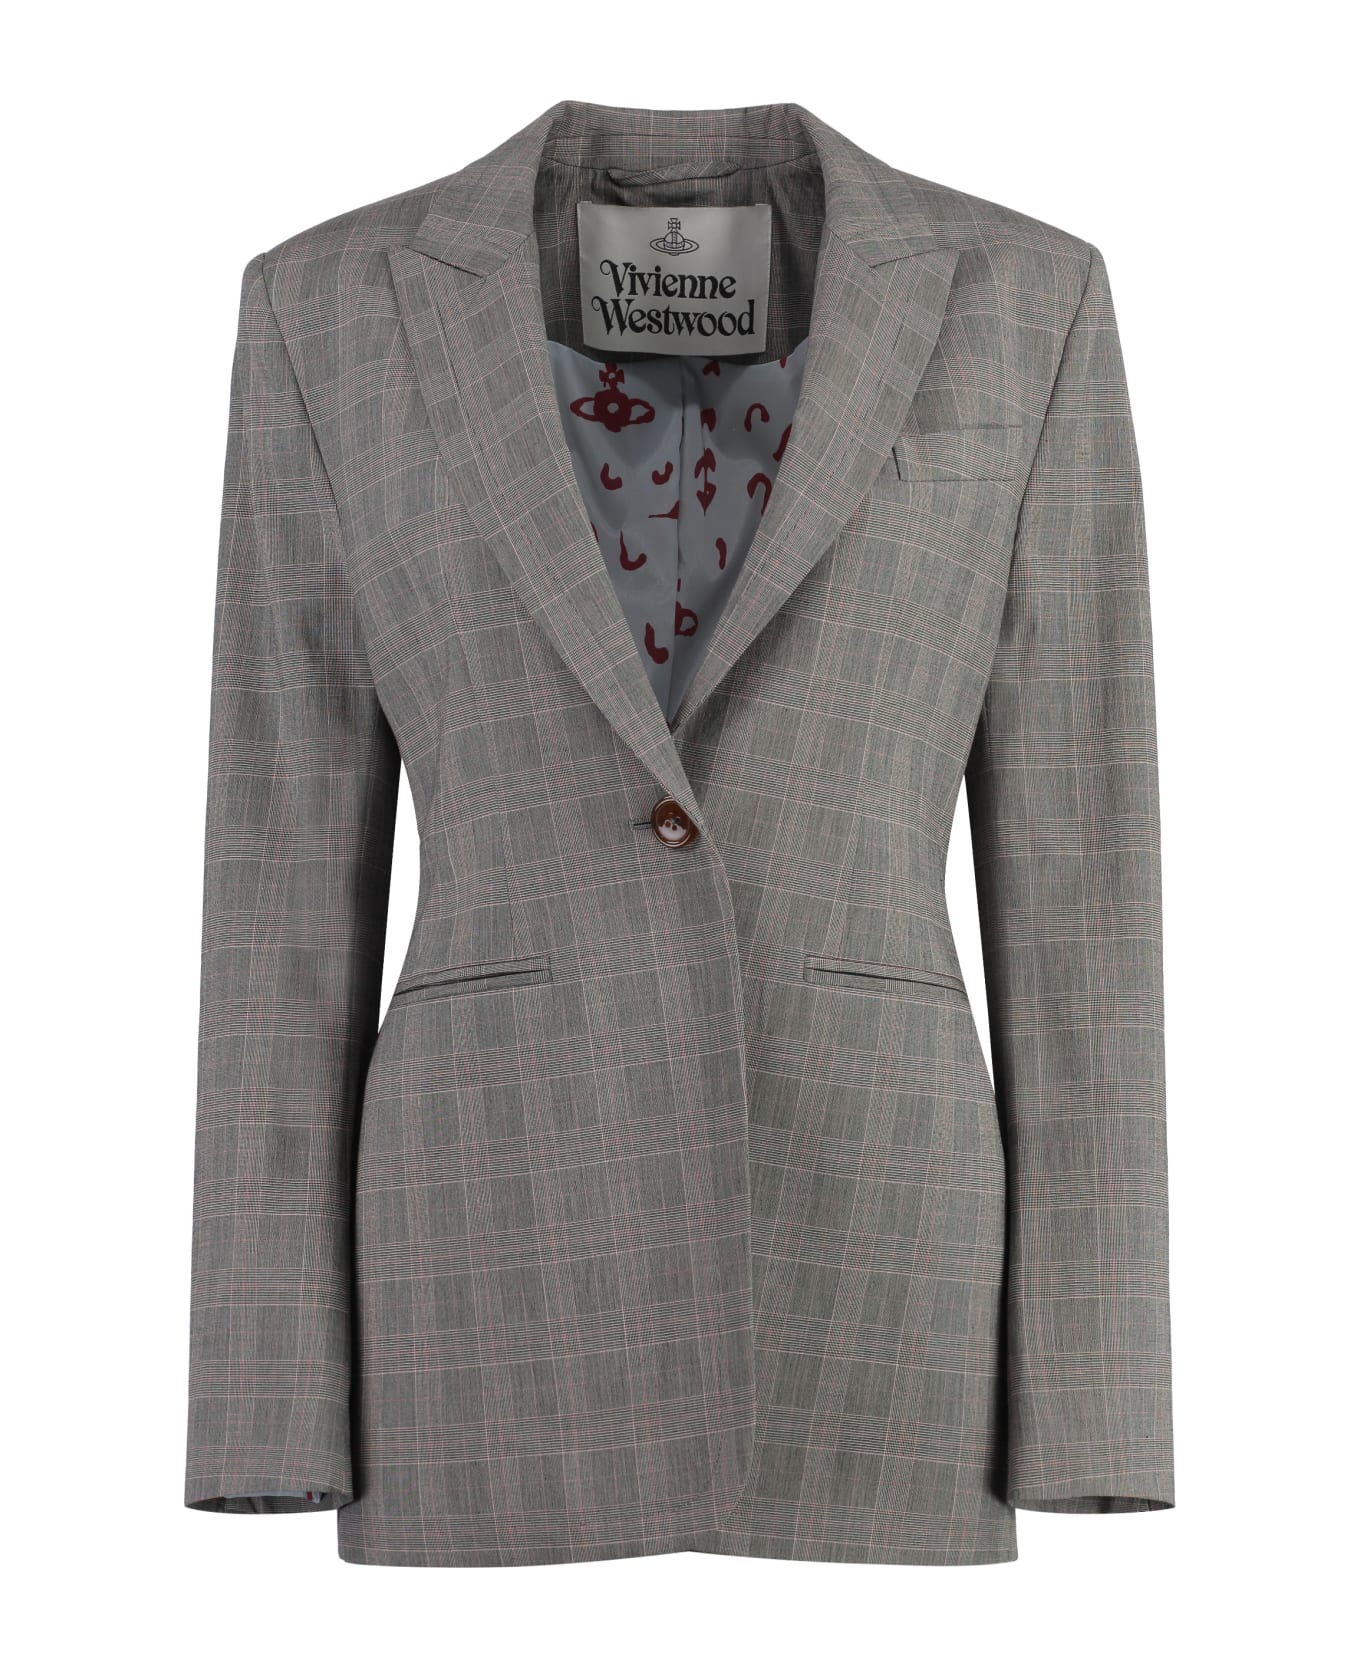 Vivienne Westwood Prince Of Wales Checked Jacket - grey ブレザー